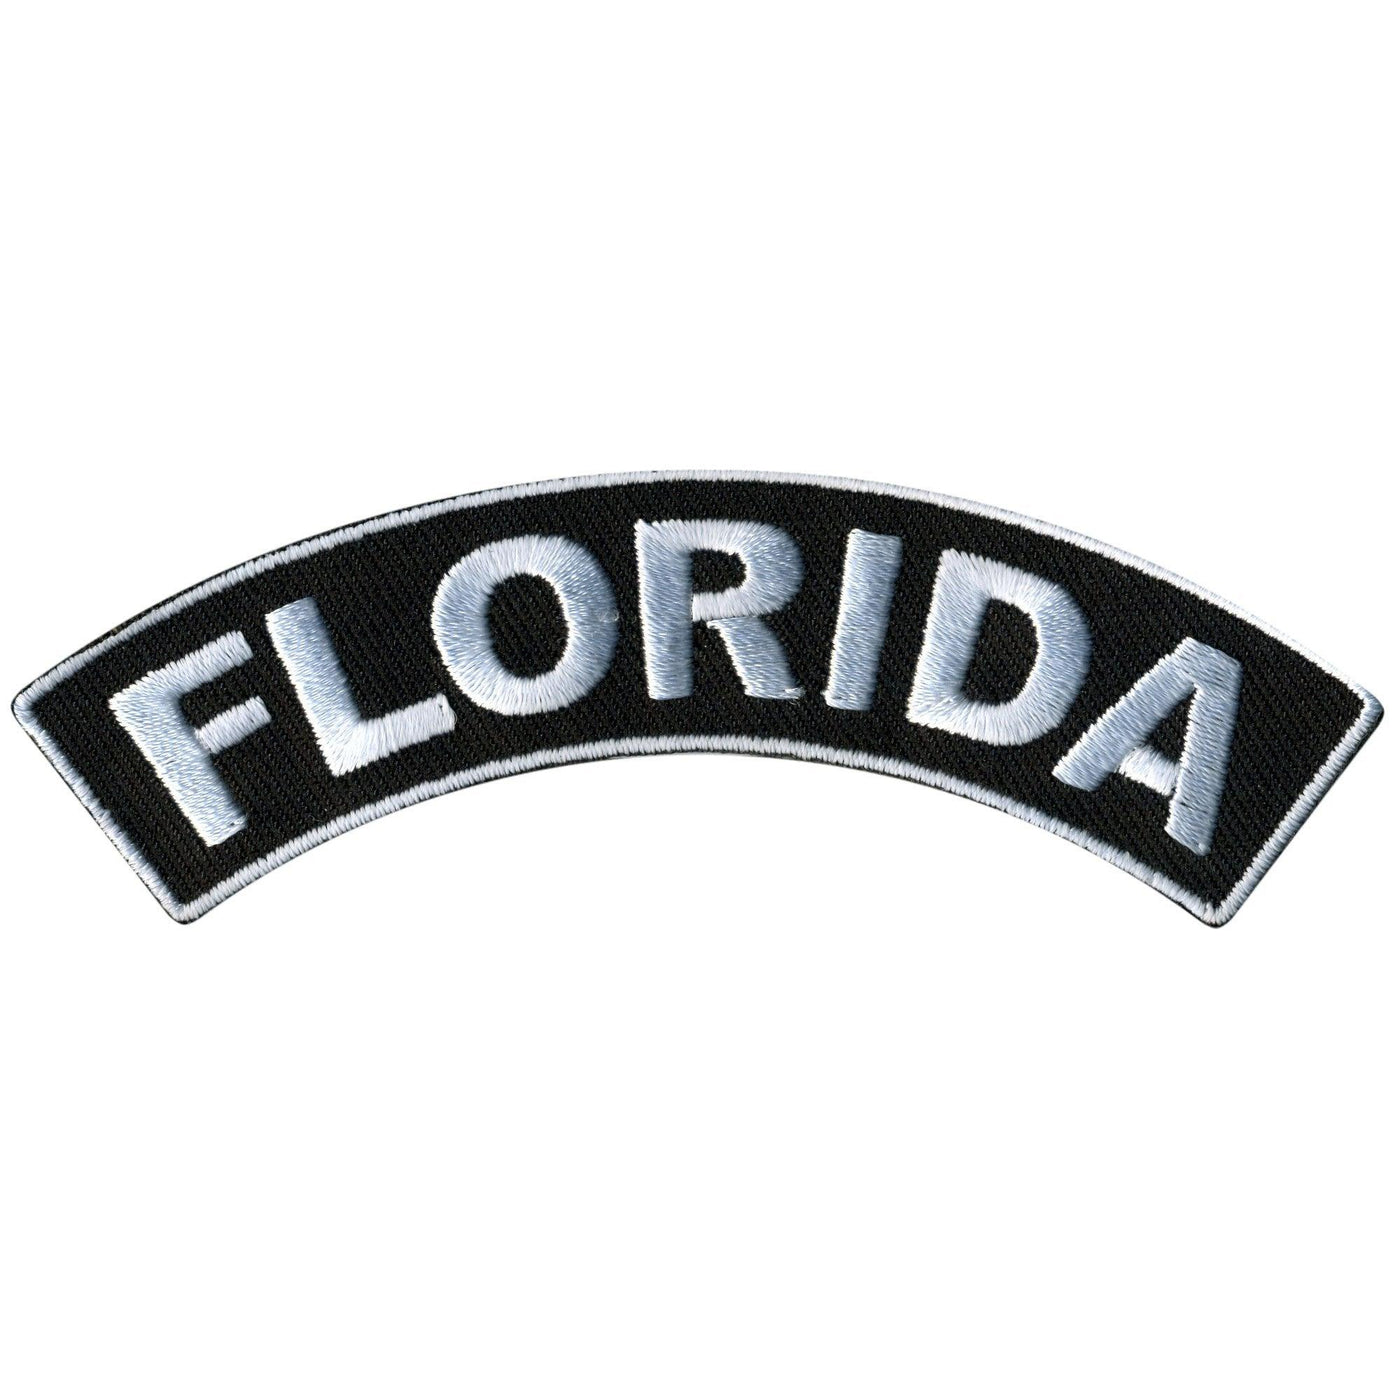 Hot Leathers Florida 4” X 1” Top Rocker Patch - American Legend Rider